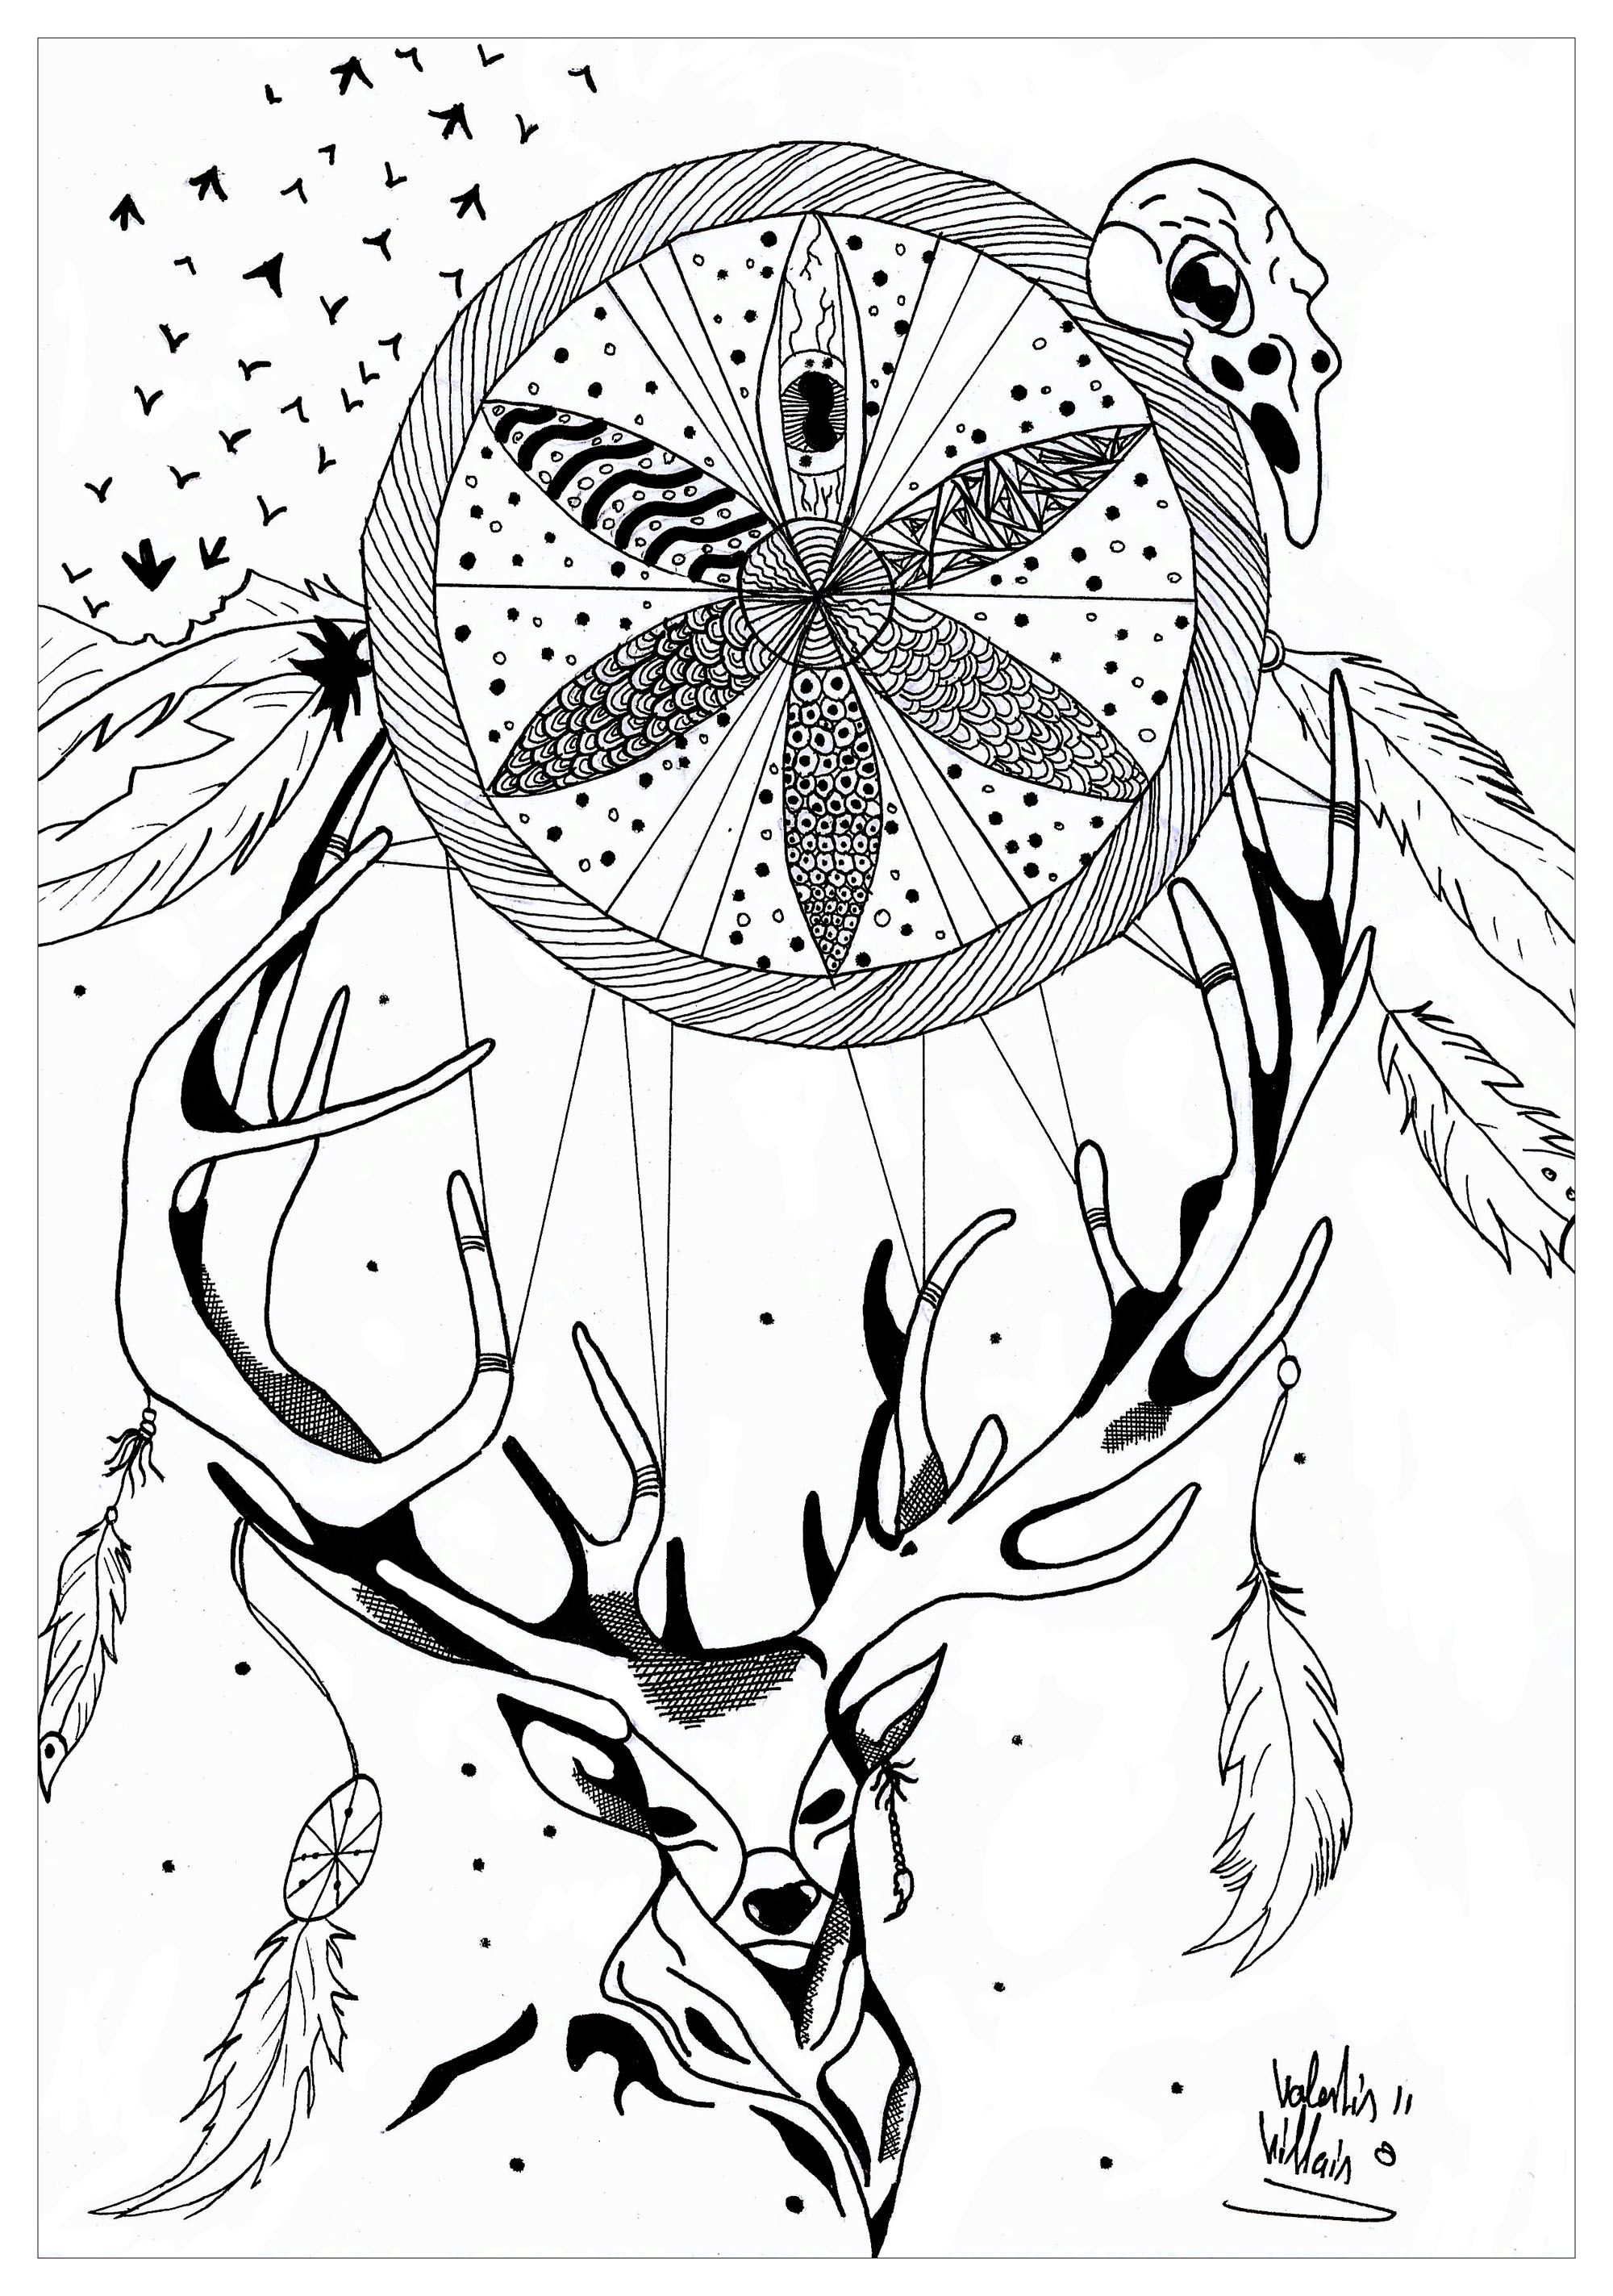 Coloring page of a deer with a dreamcatcherThis original drawing represents a deer with beautiful antlers, supporting an incredible dreamcatcher.